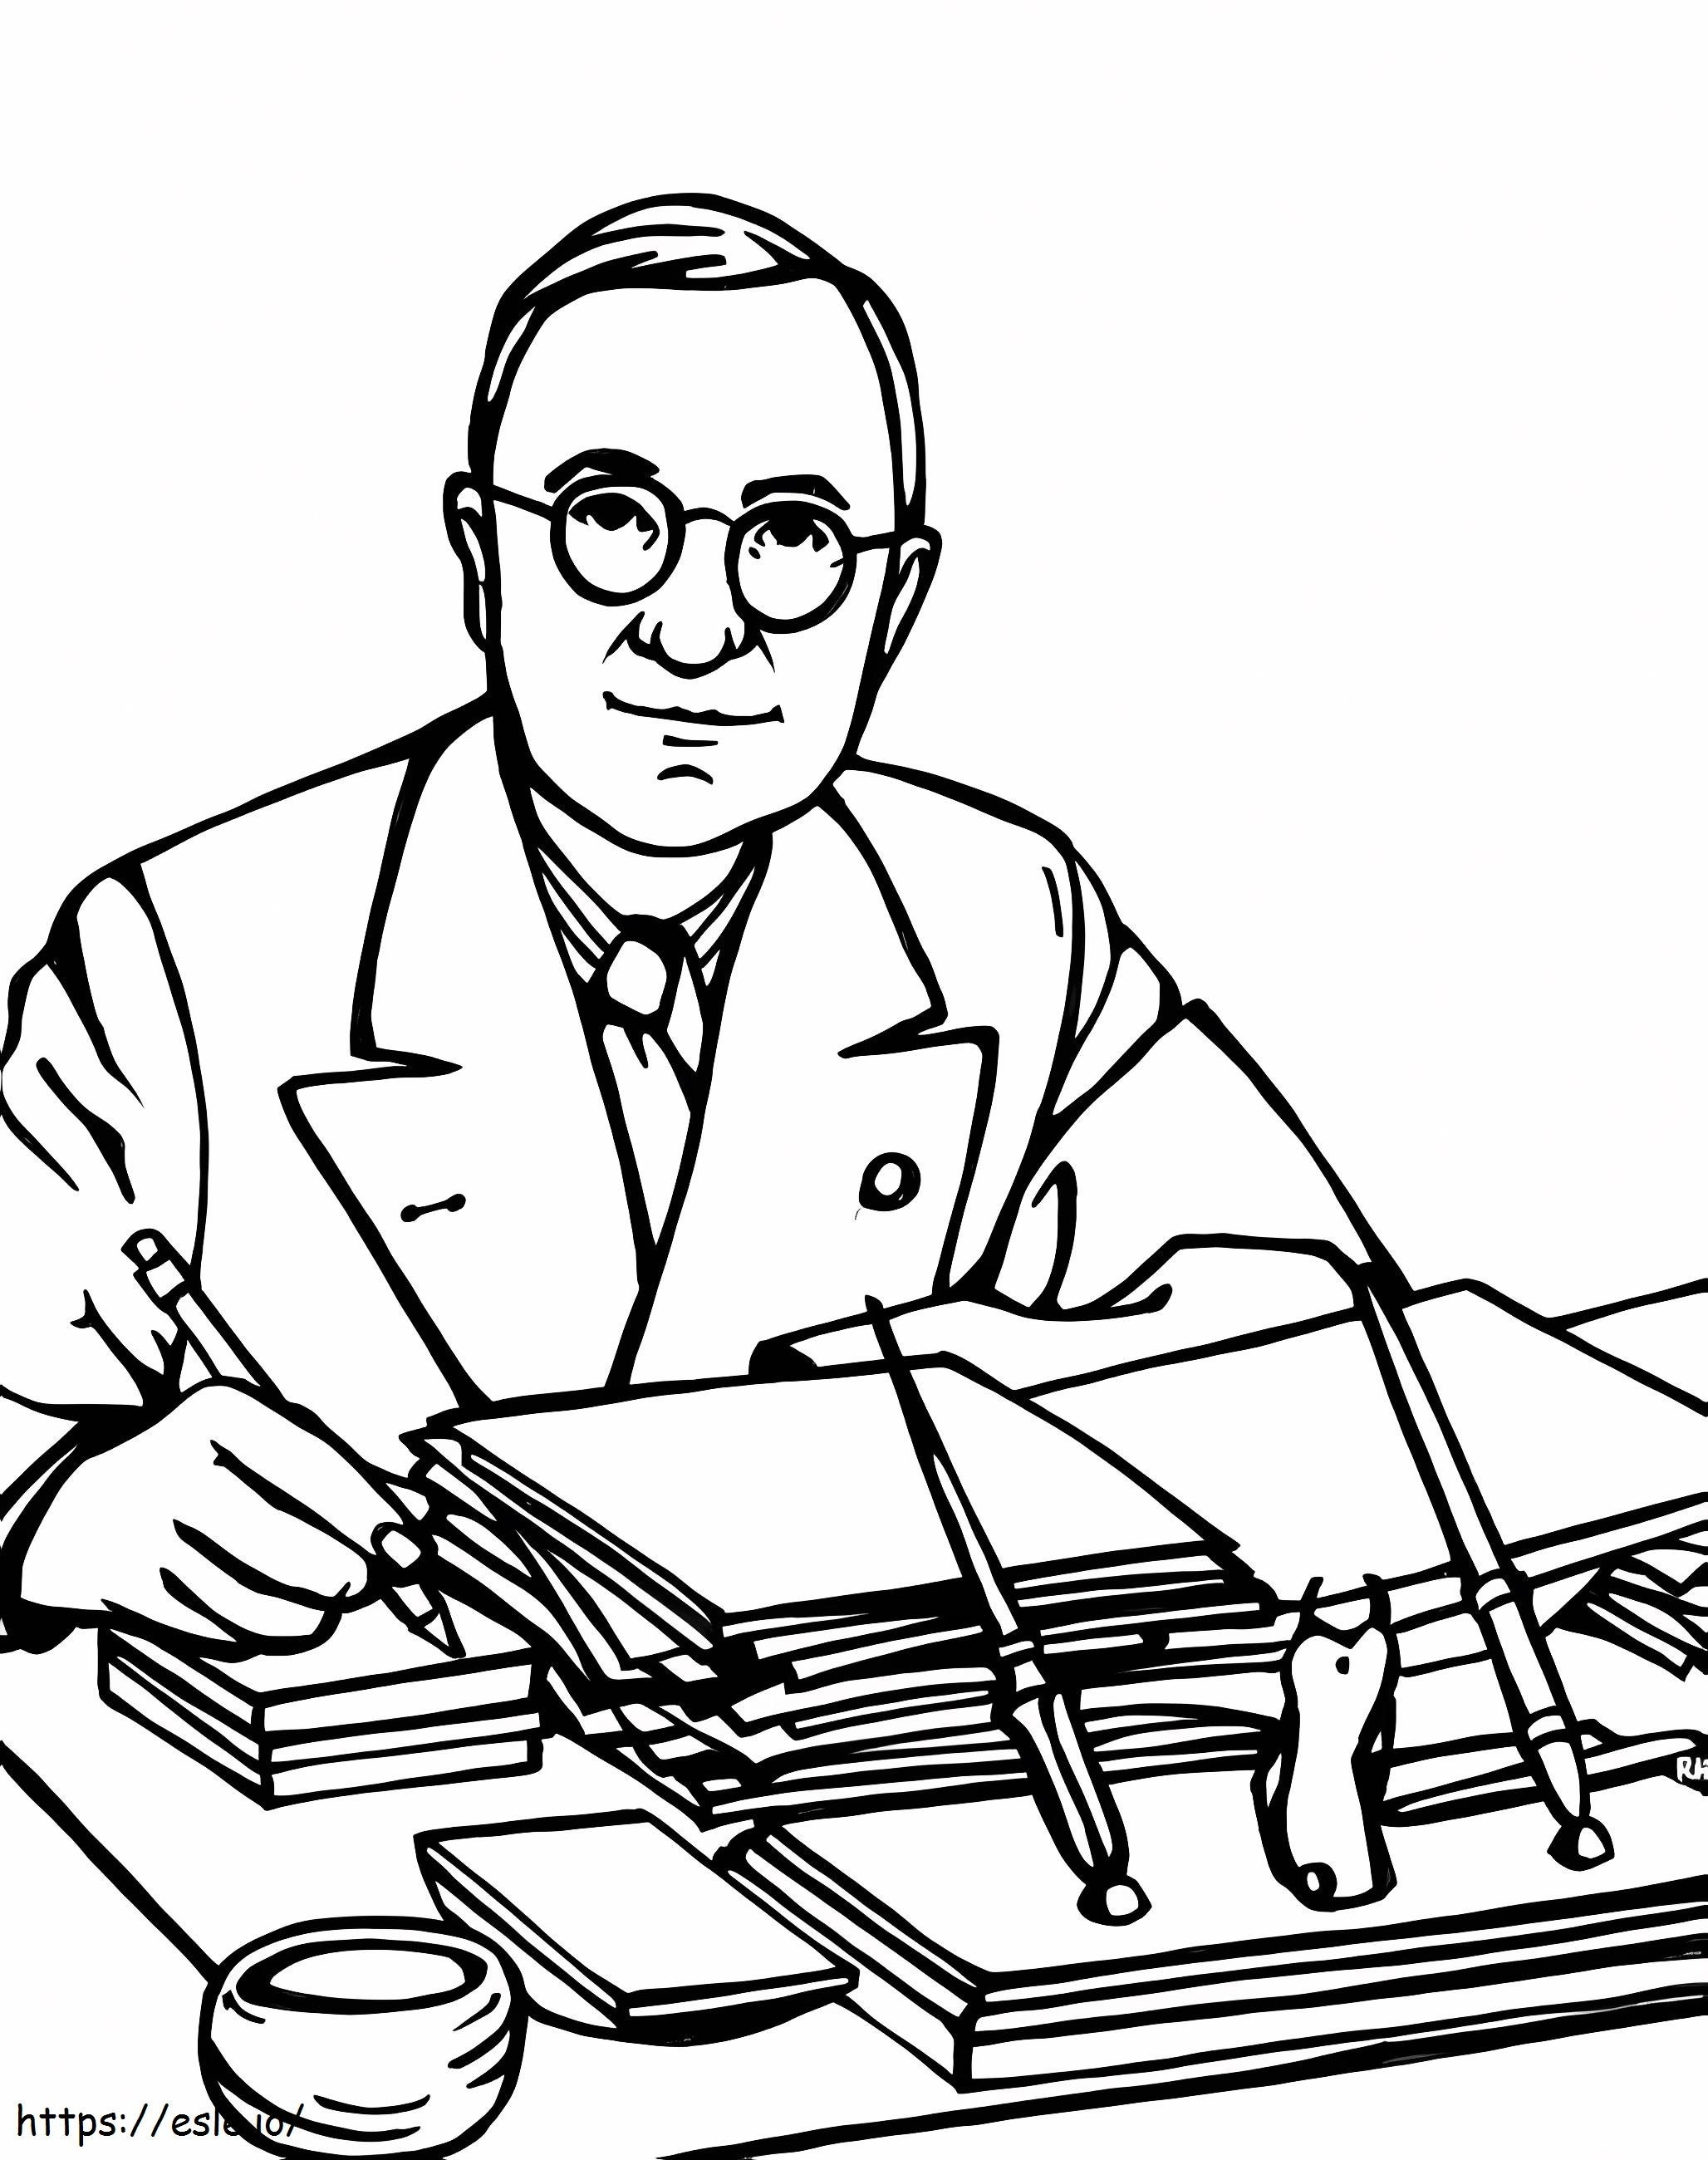 US President Harry S. Truman coloring page